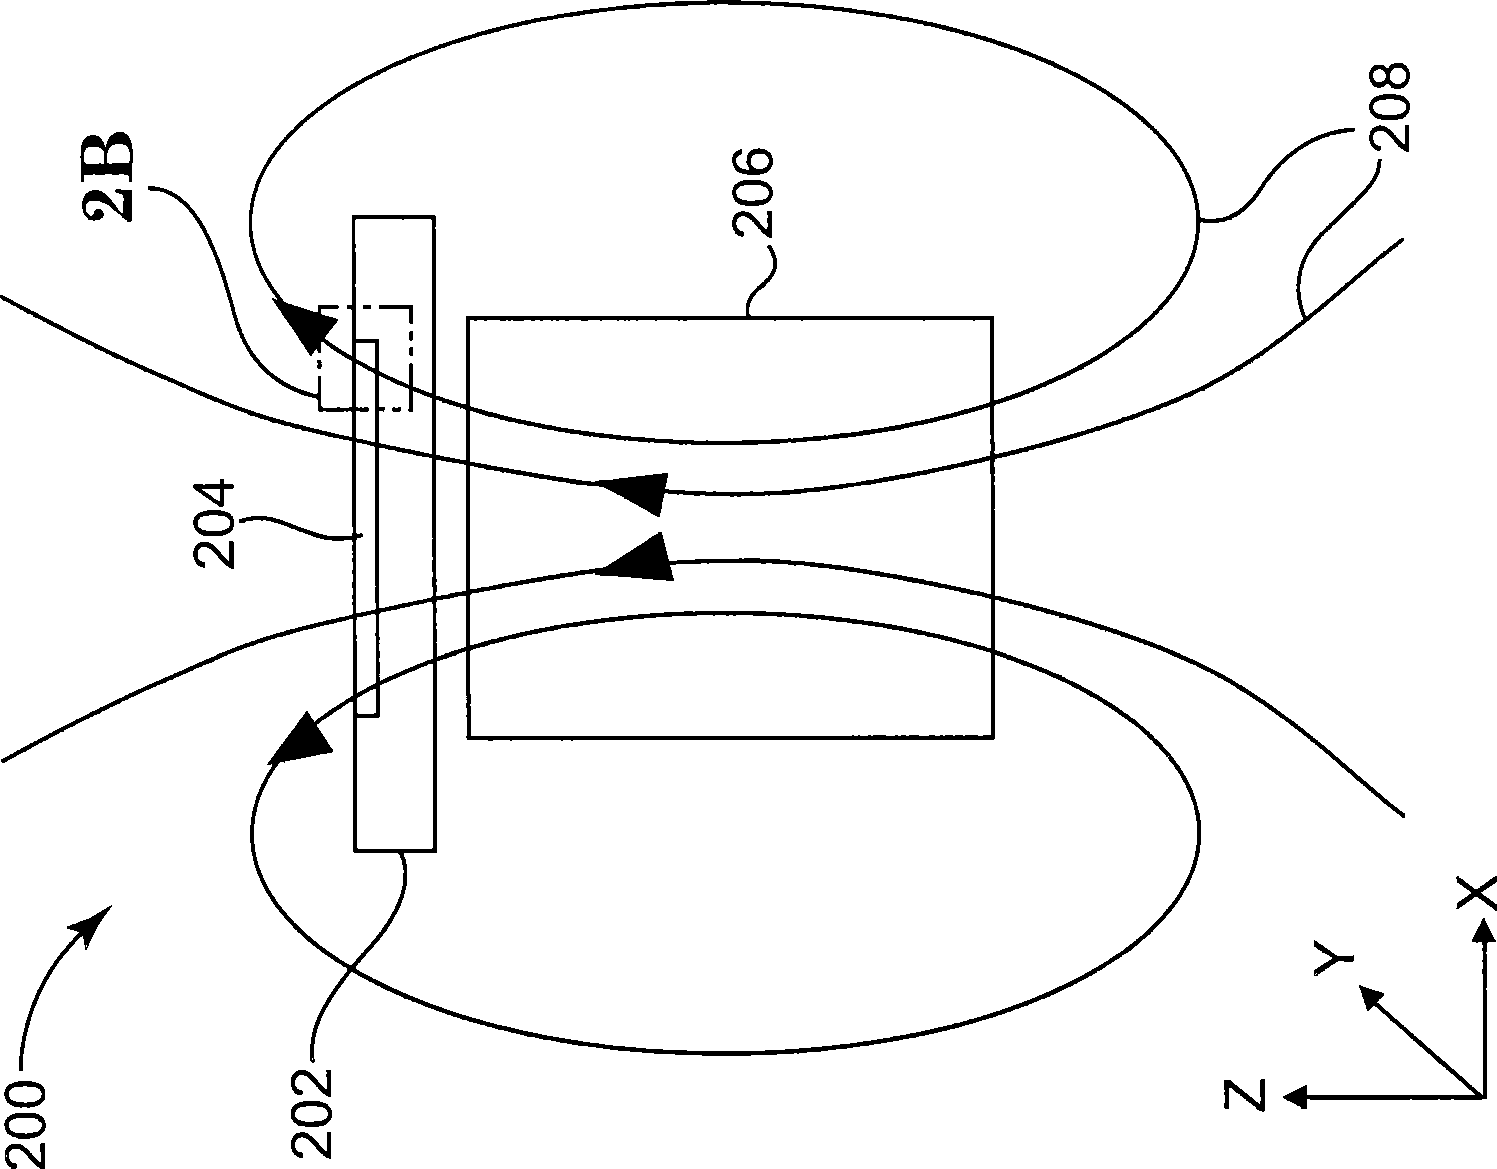 Sensor module with mold encapsulation for applying a bias magnetic field